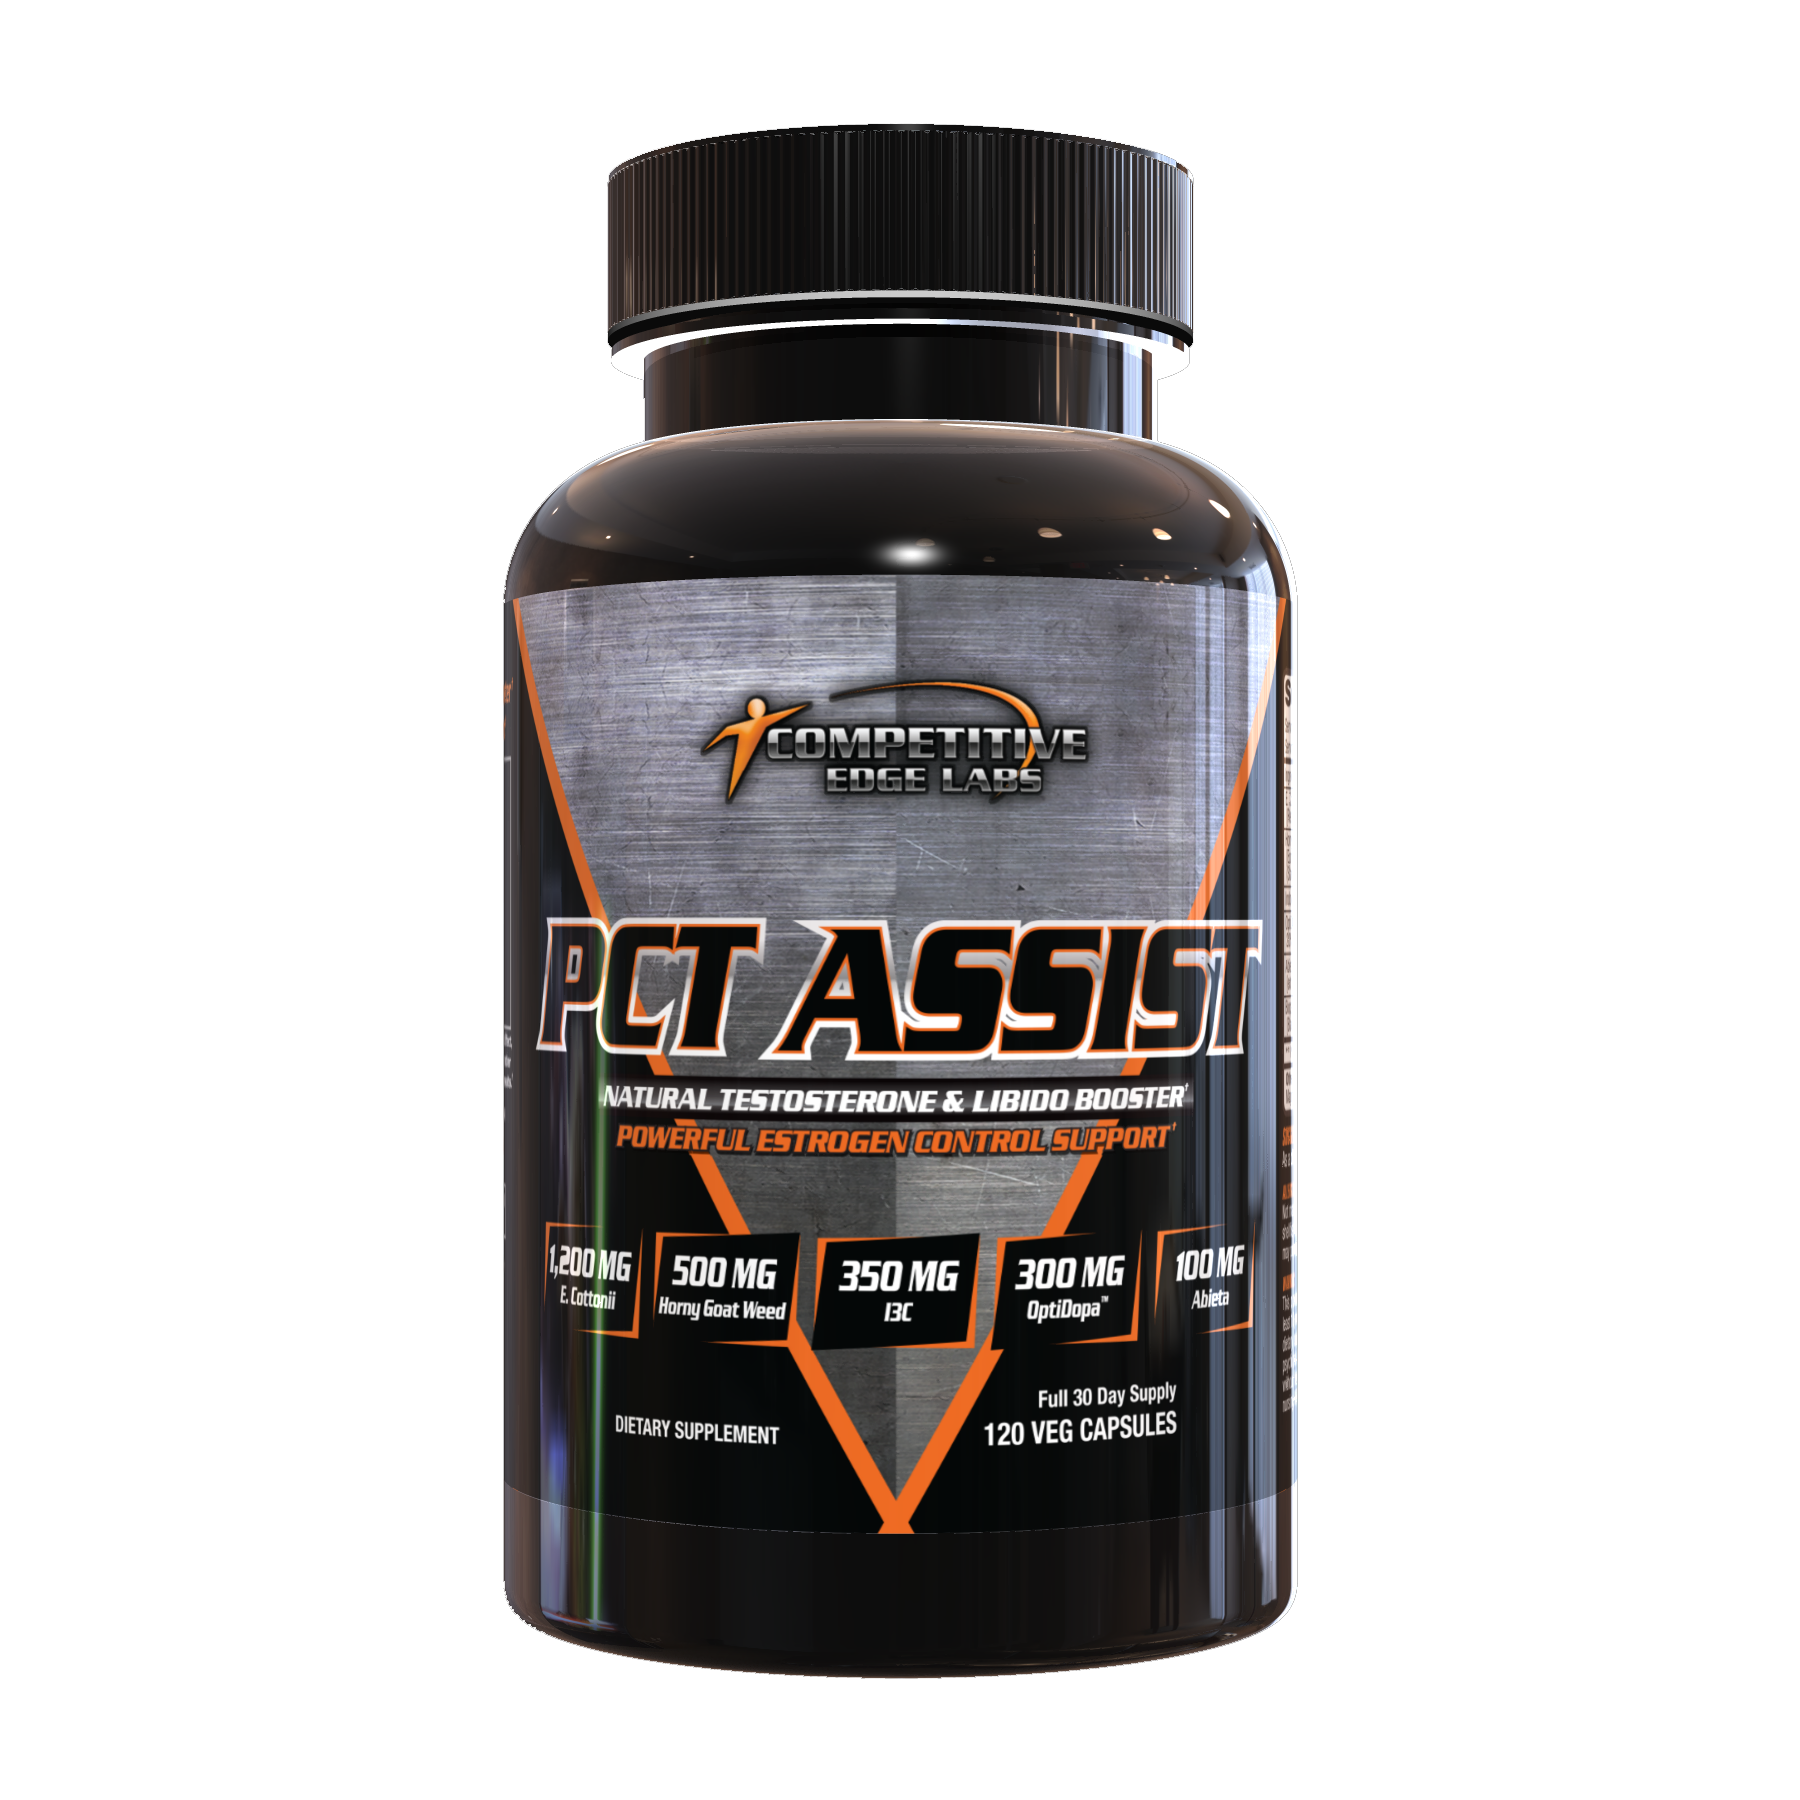 Competitive Edge Labs PCT Assist